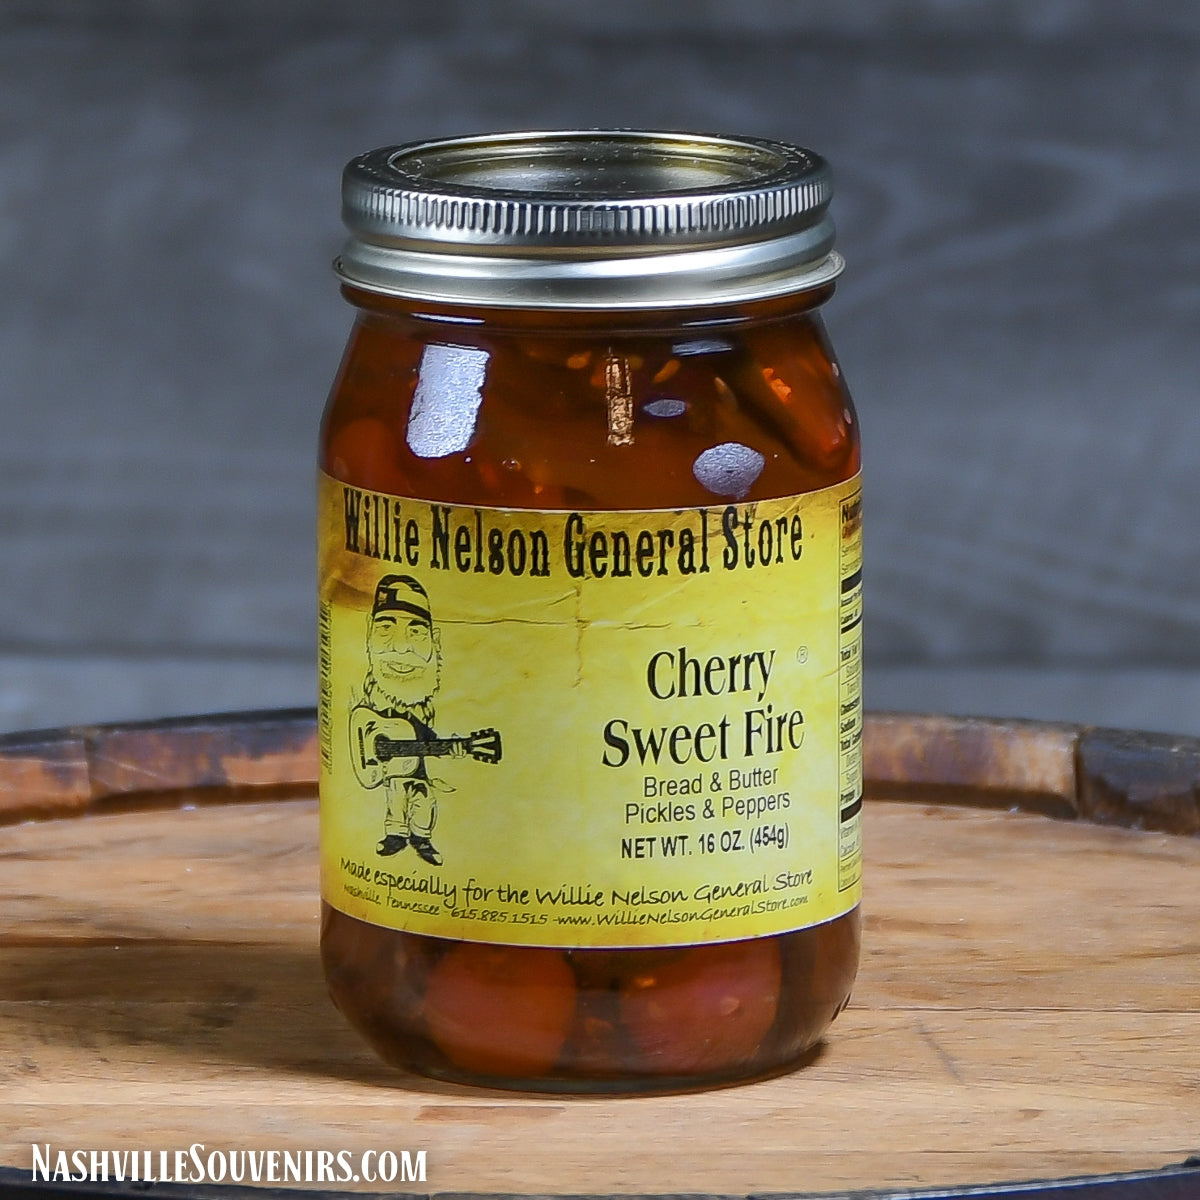 Cherry Sweet Fire Bread and Butter Pickles & Peppers